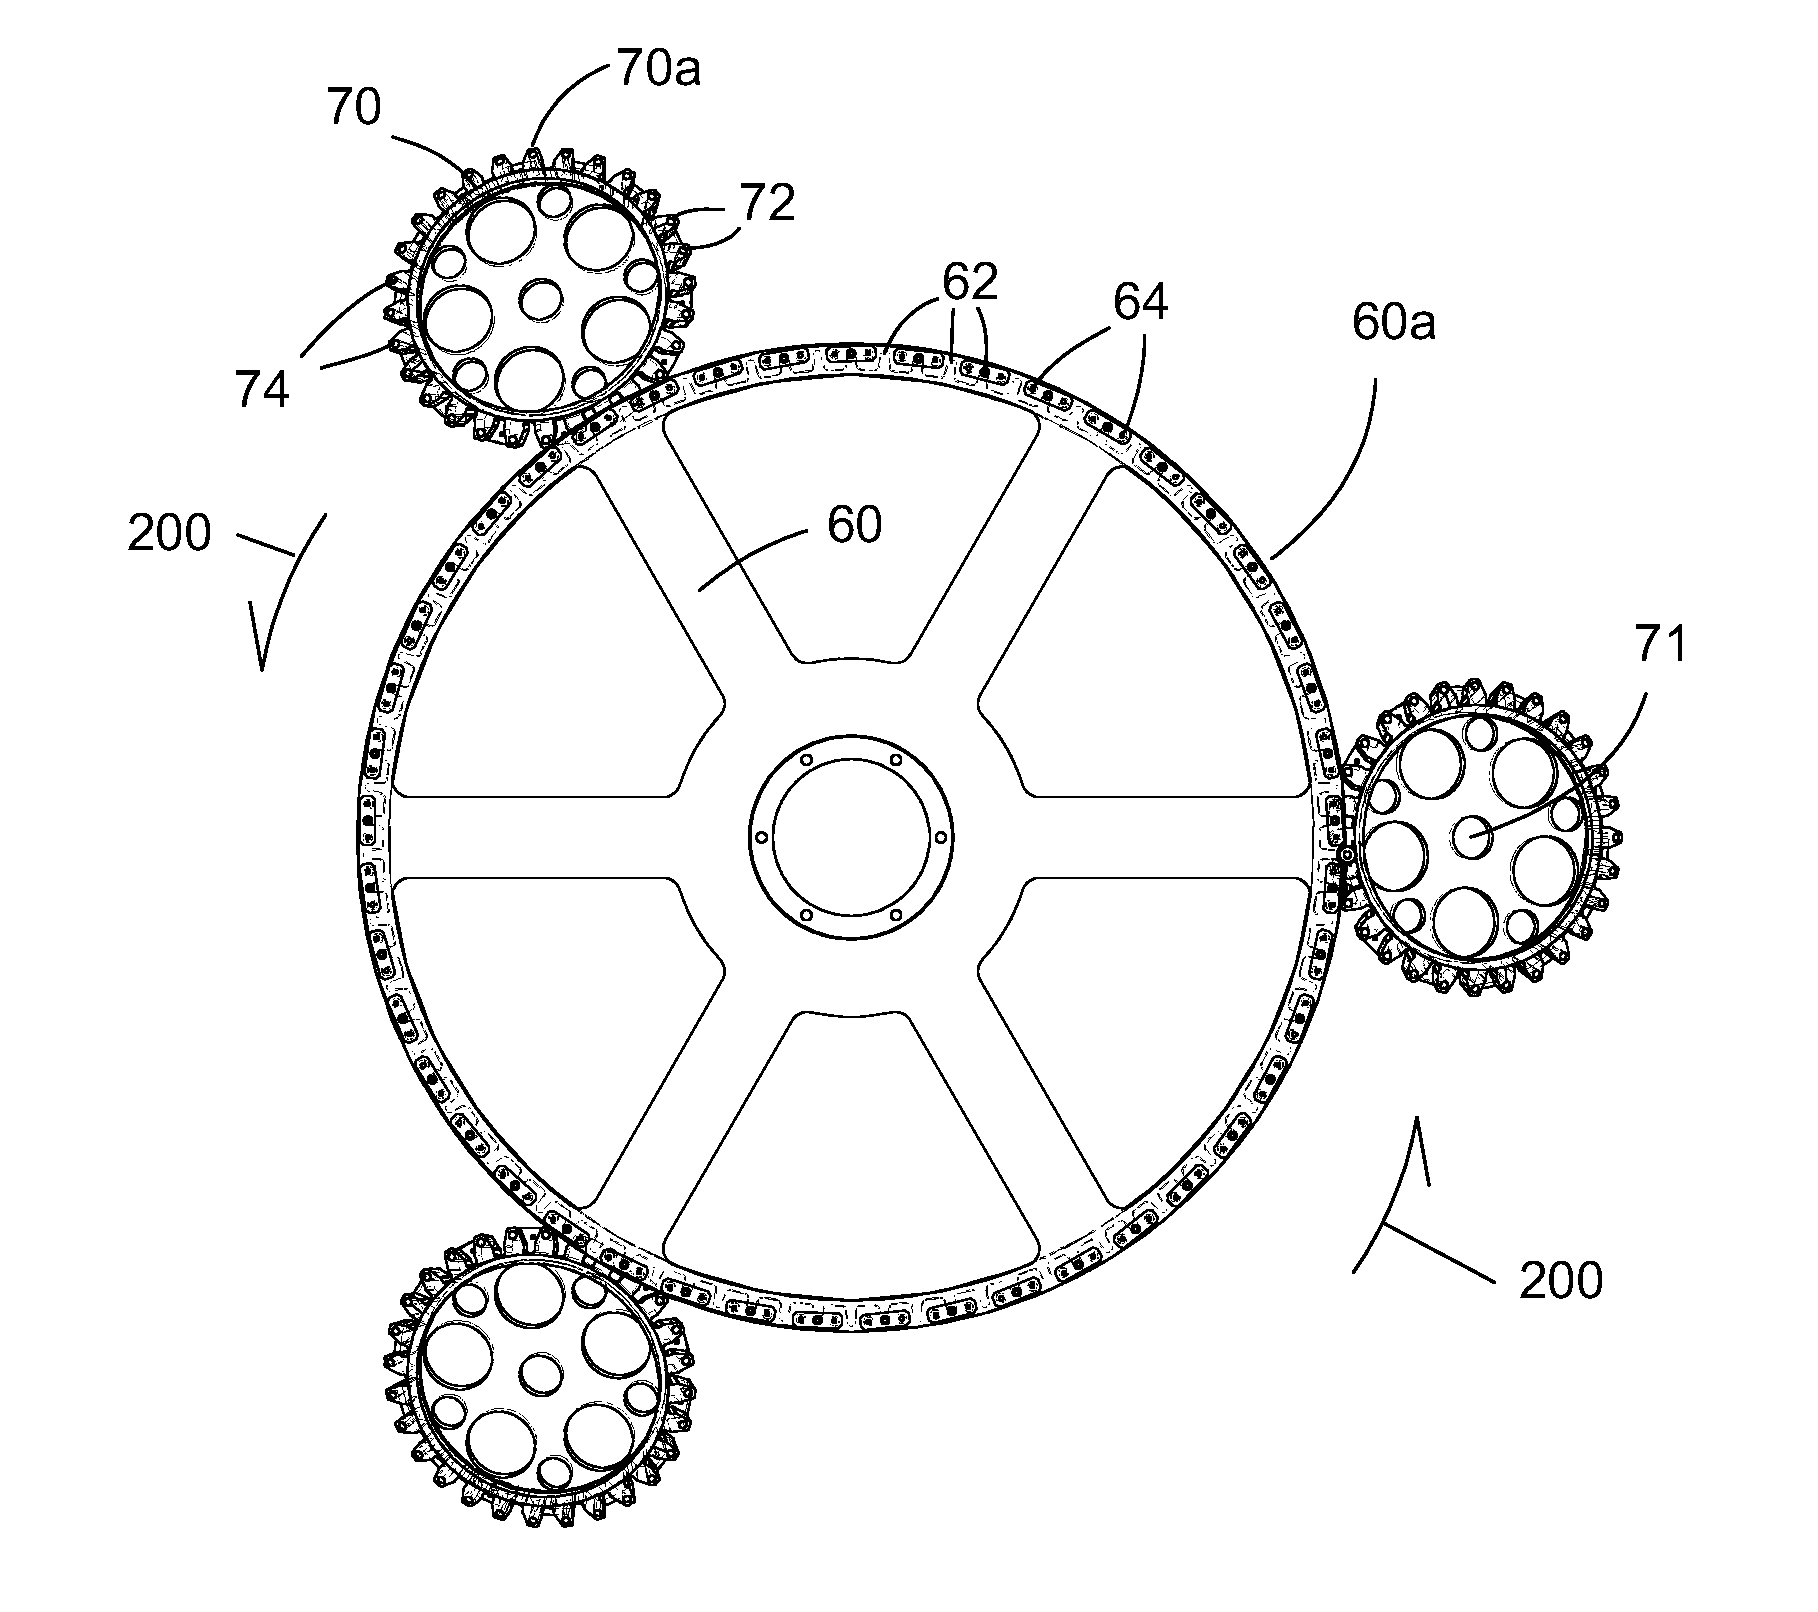 Non-contact magnetic drive assembly with mechanical stop elements